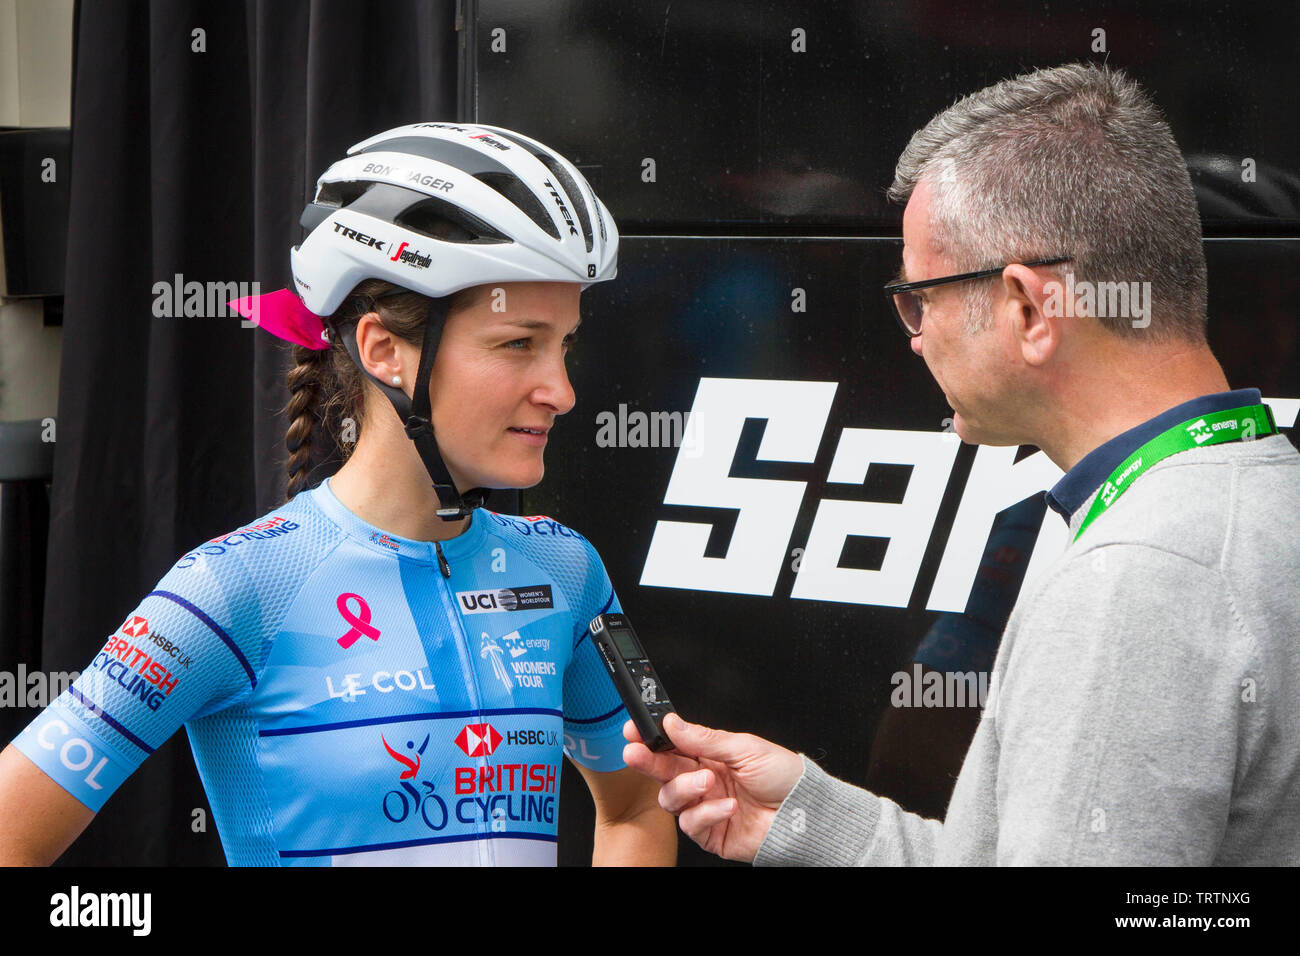 Henley-on-Thames, UK, 12 June 2019.  Lizzie Deignan (née Armitstead) of the of the Trek-Segafredo team wearing the Best British Rider Jersey seen interviewed before the start of the 3rd stage of the OVO Energy Women's tour from Henley-on-Thames to Blenheim Palace. Credit: Harry Harrison/Alamy Live News Stock Photo